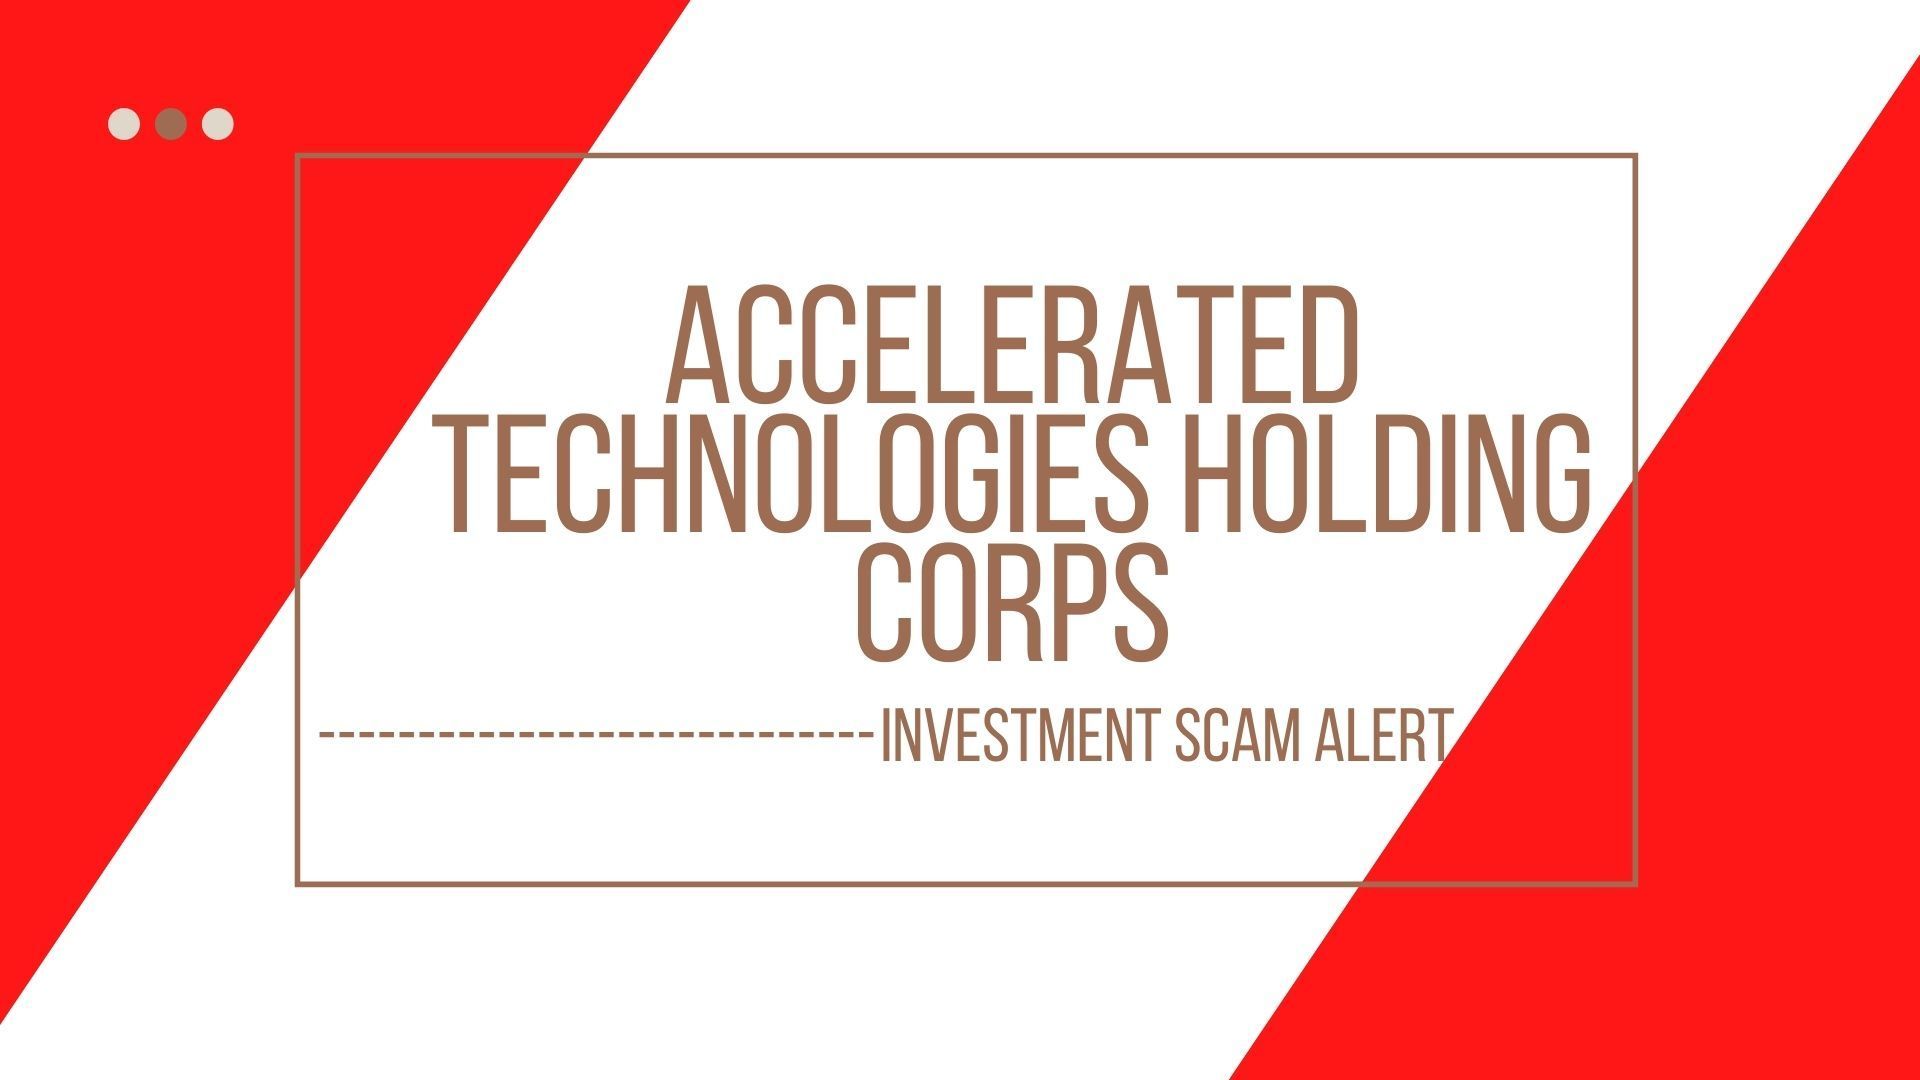 OTC Scam Alert: Accelerated Technologies Holding Corps